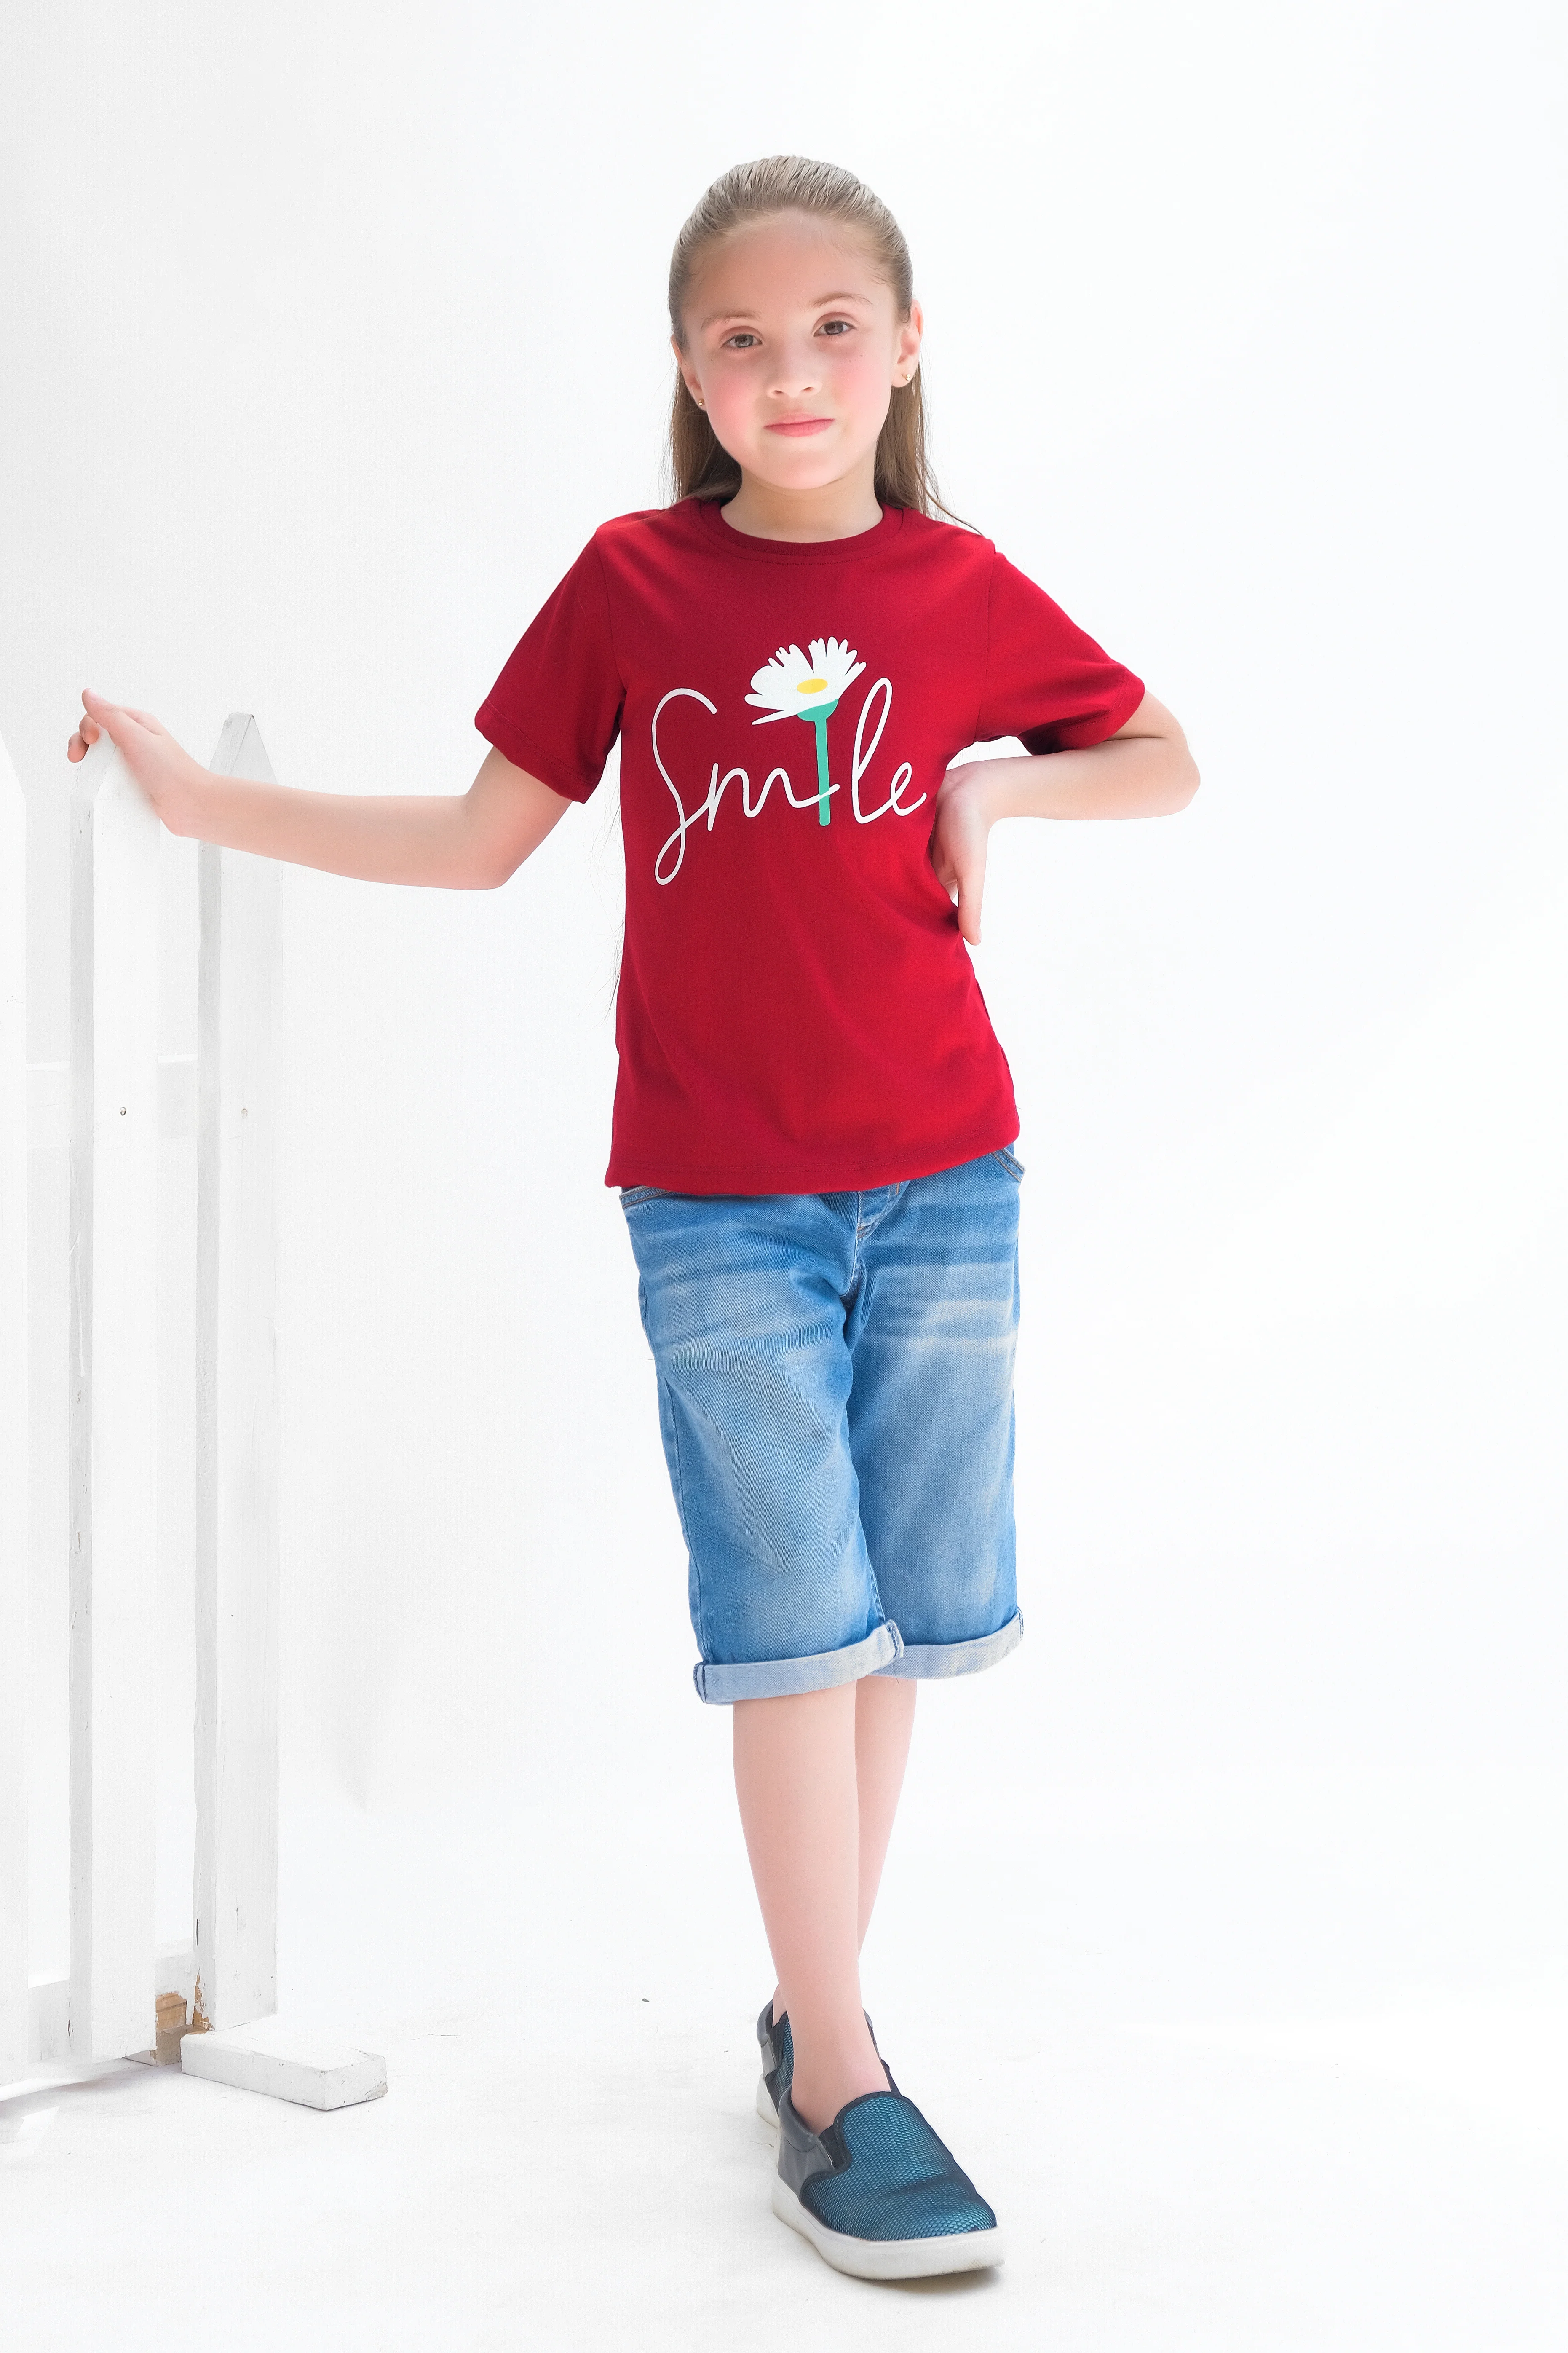 Smile - Half Sleeves T-Shirts For Kids - Maroon - SBT-353